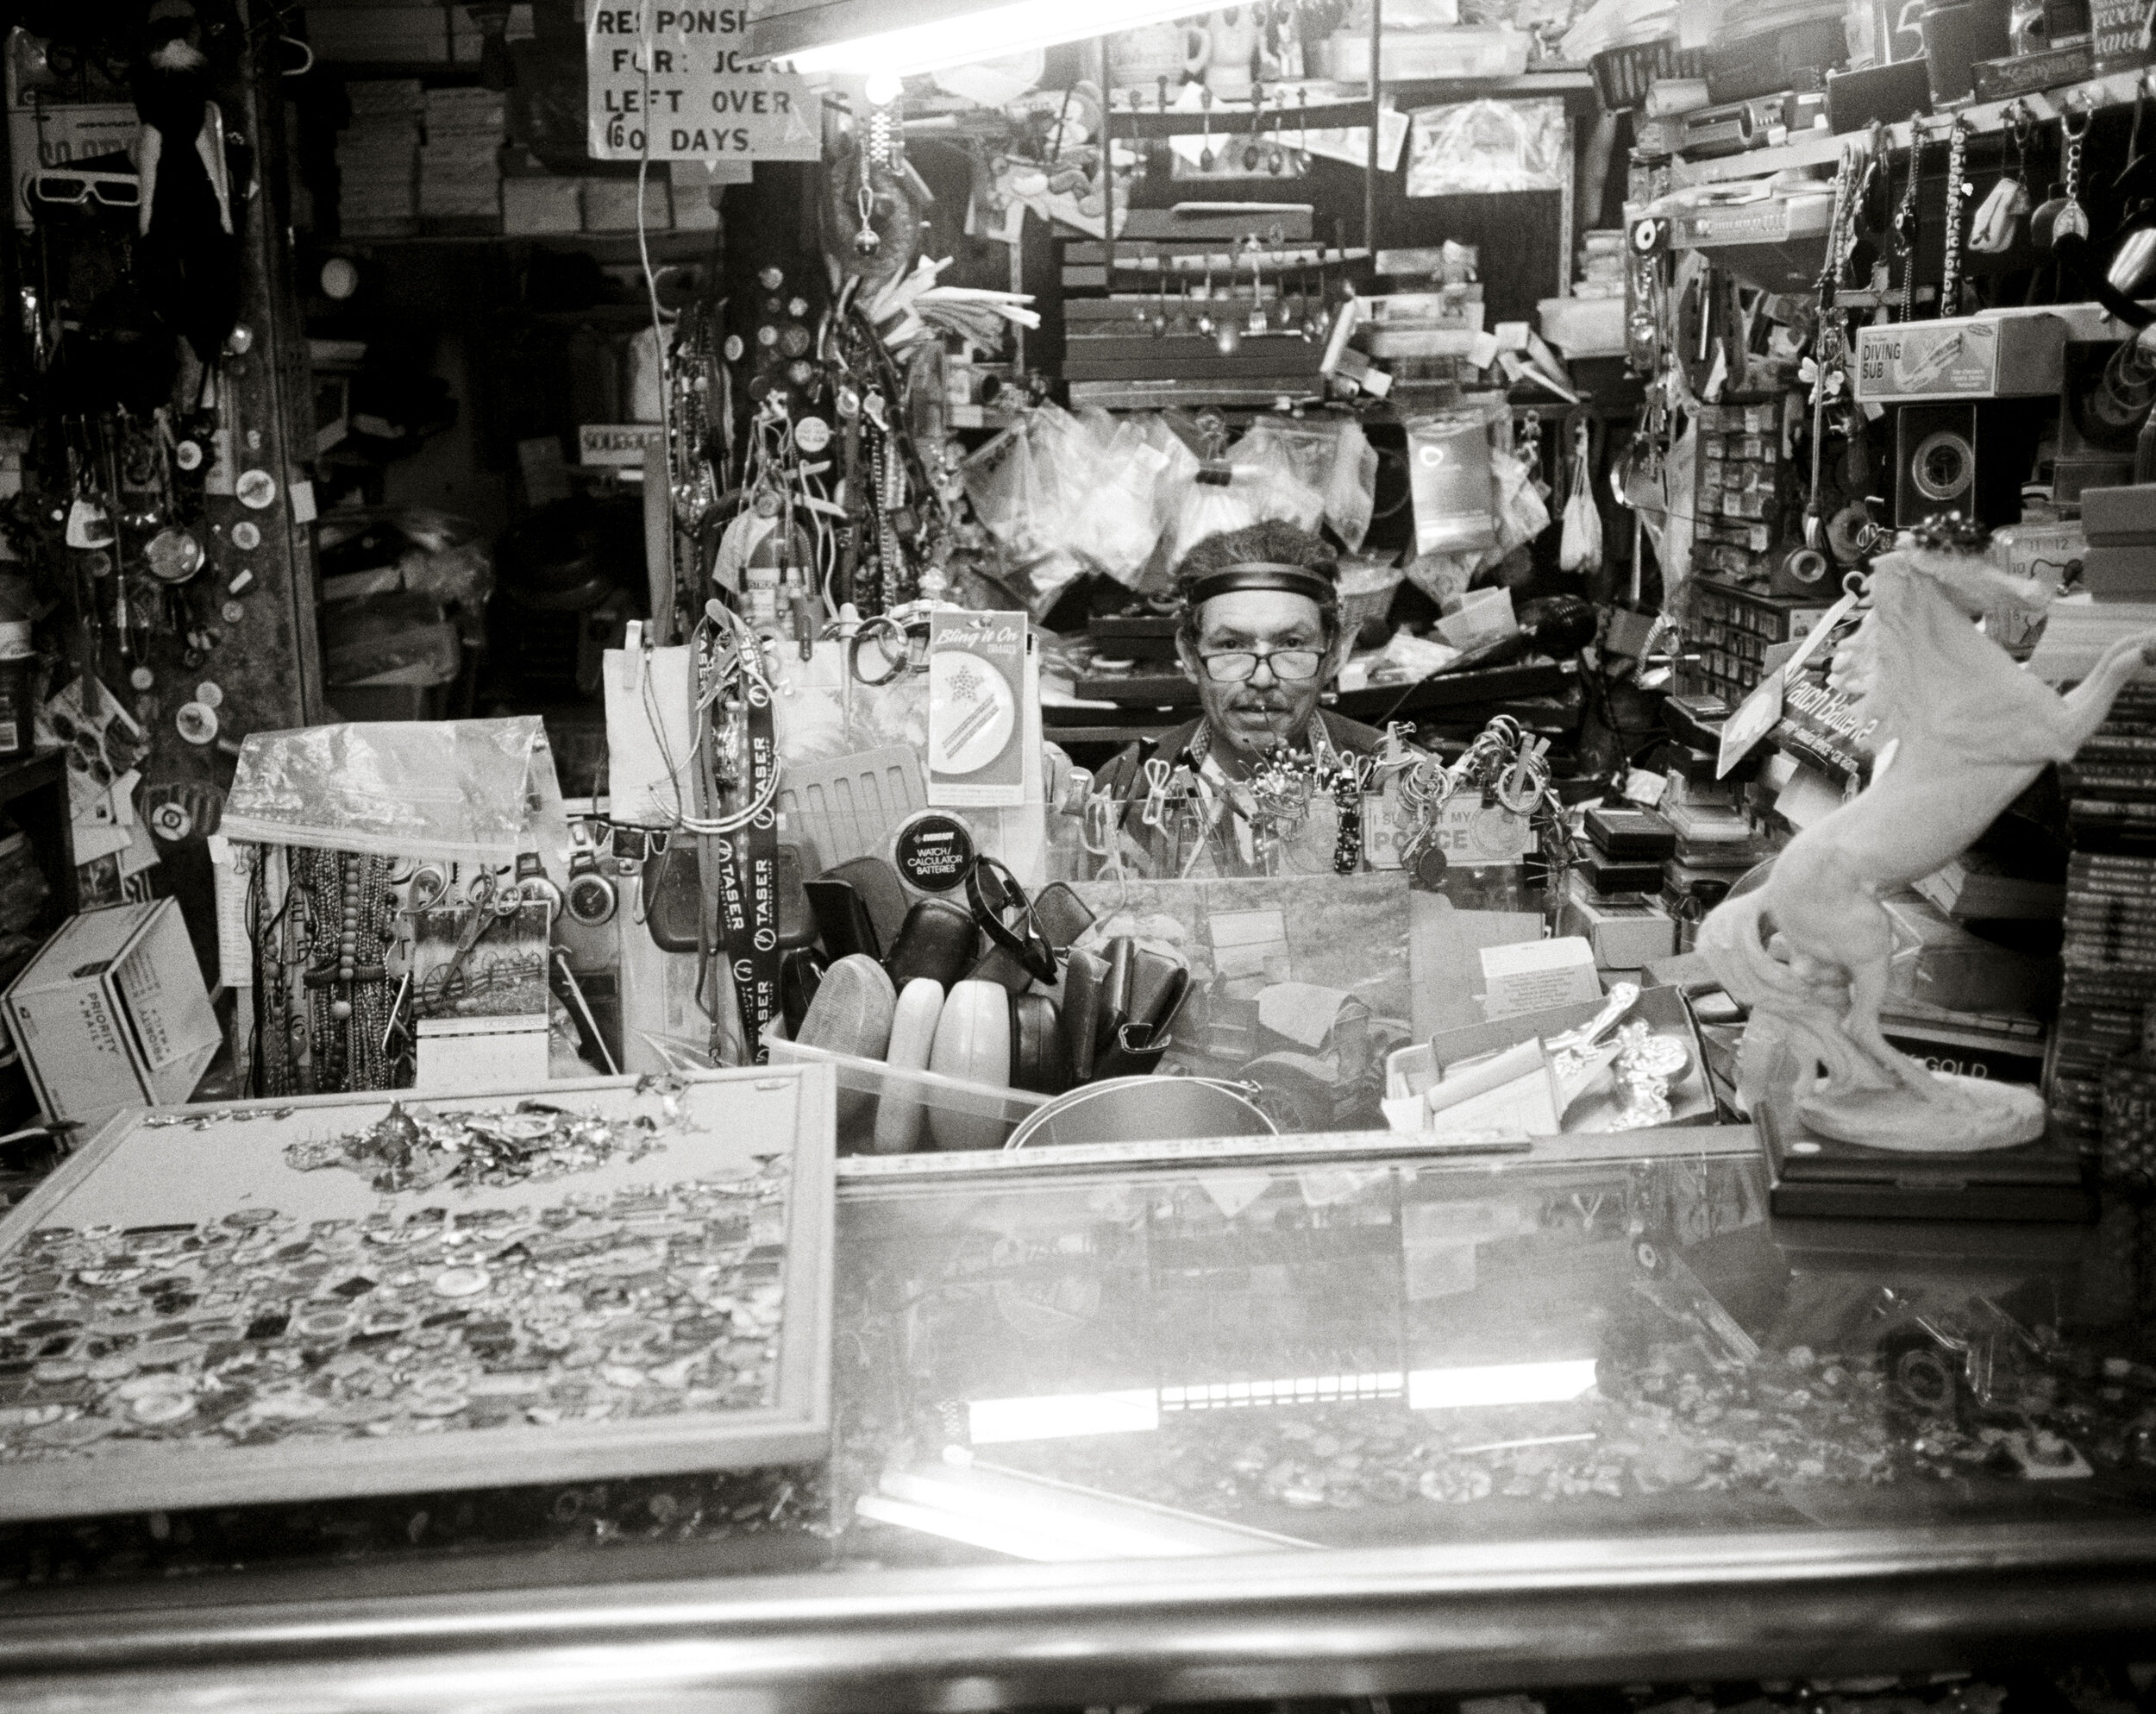   Tony at his desk, Tony’s Watch and Jewelry Repair,  2015, silver gelatin print 